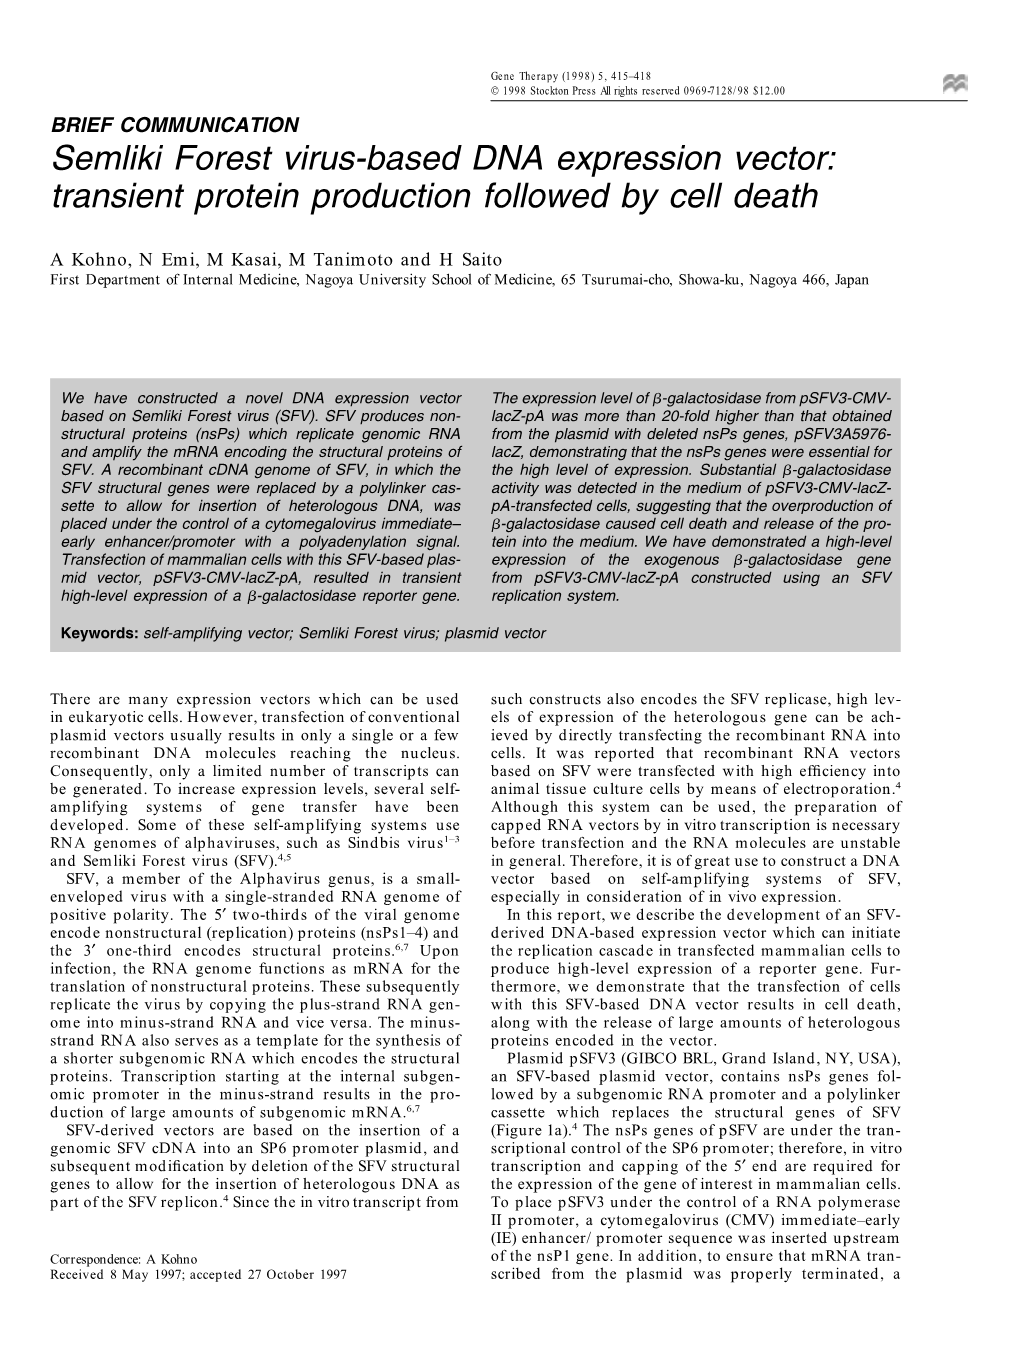 Semliki Forest Virus-Based DNA Expression Vector: Transient Protein Production Followed by Cell Death